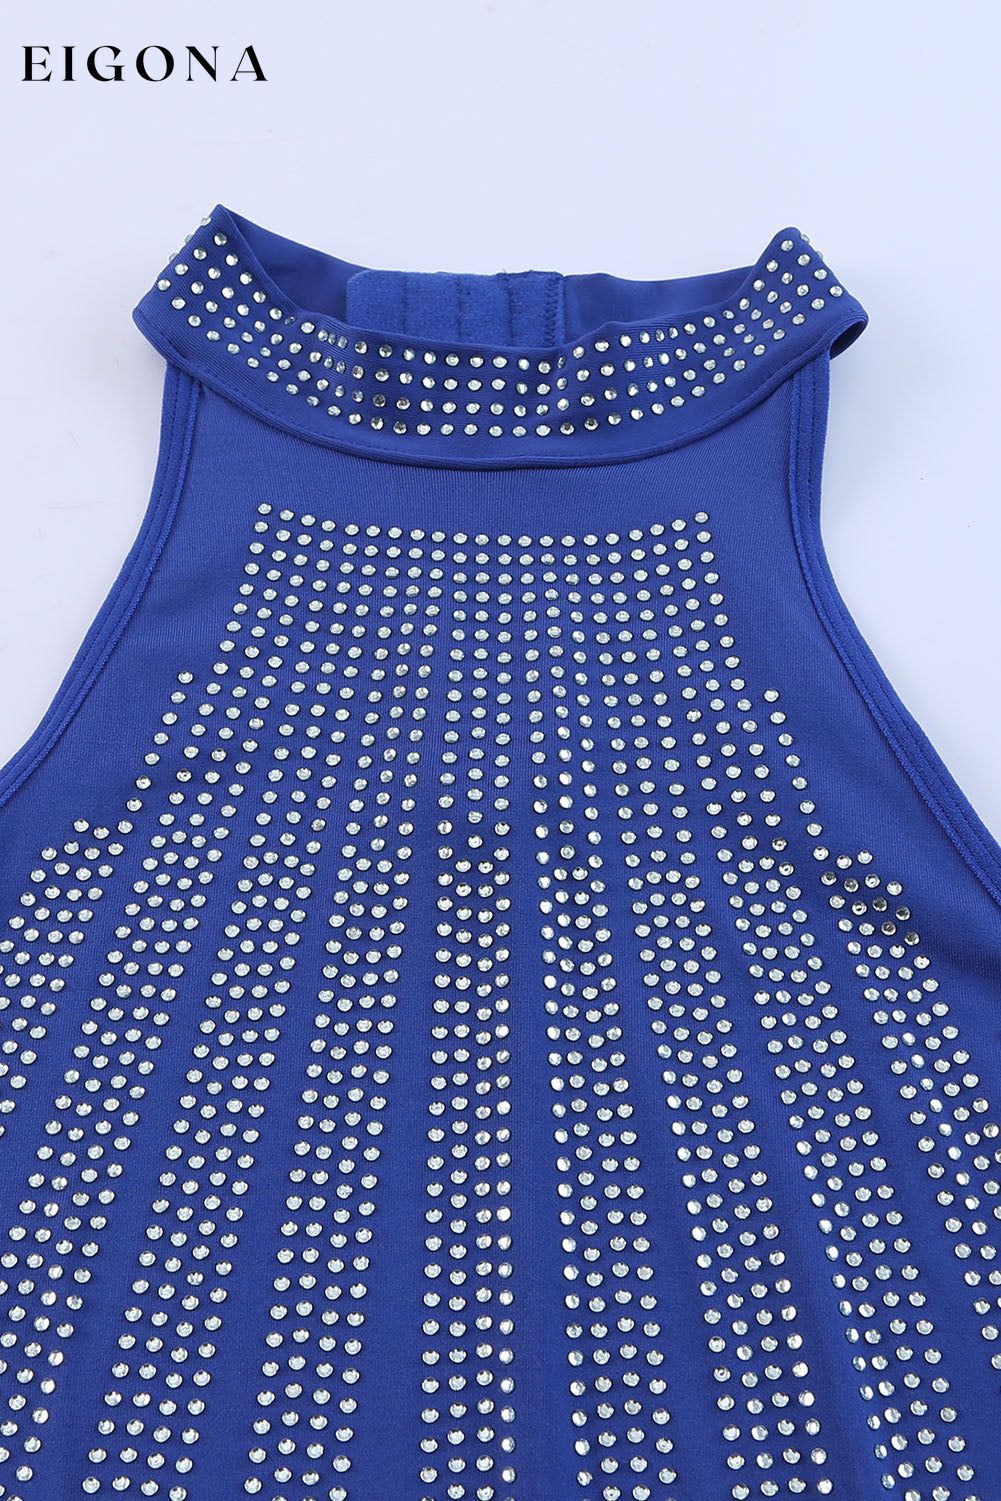 Blue High Neck Sleeveless Diamante Bodysuit clothes Craft Rhinestone Craft Sequin Day Valentine's Day Occasion Night Out Occasion Rock & Music Print Solid Color Season Summer shirt sleeveless bodysuit Style Feminine top turtleneck bodysuit